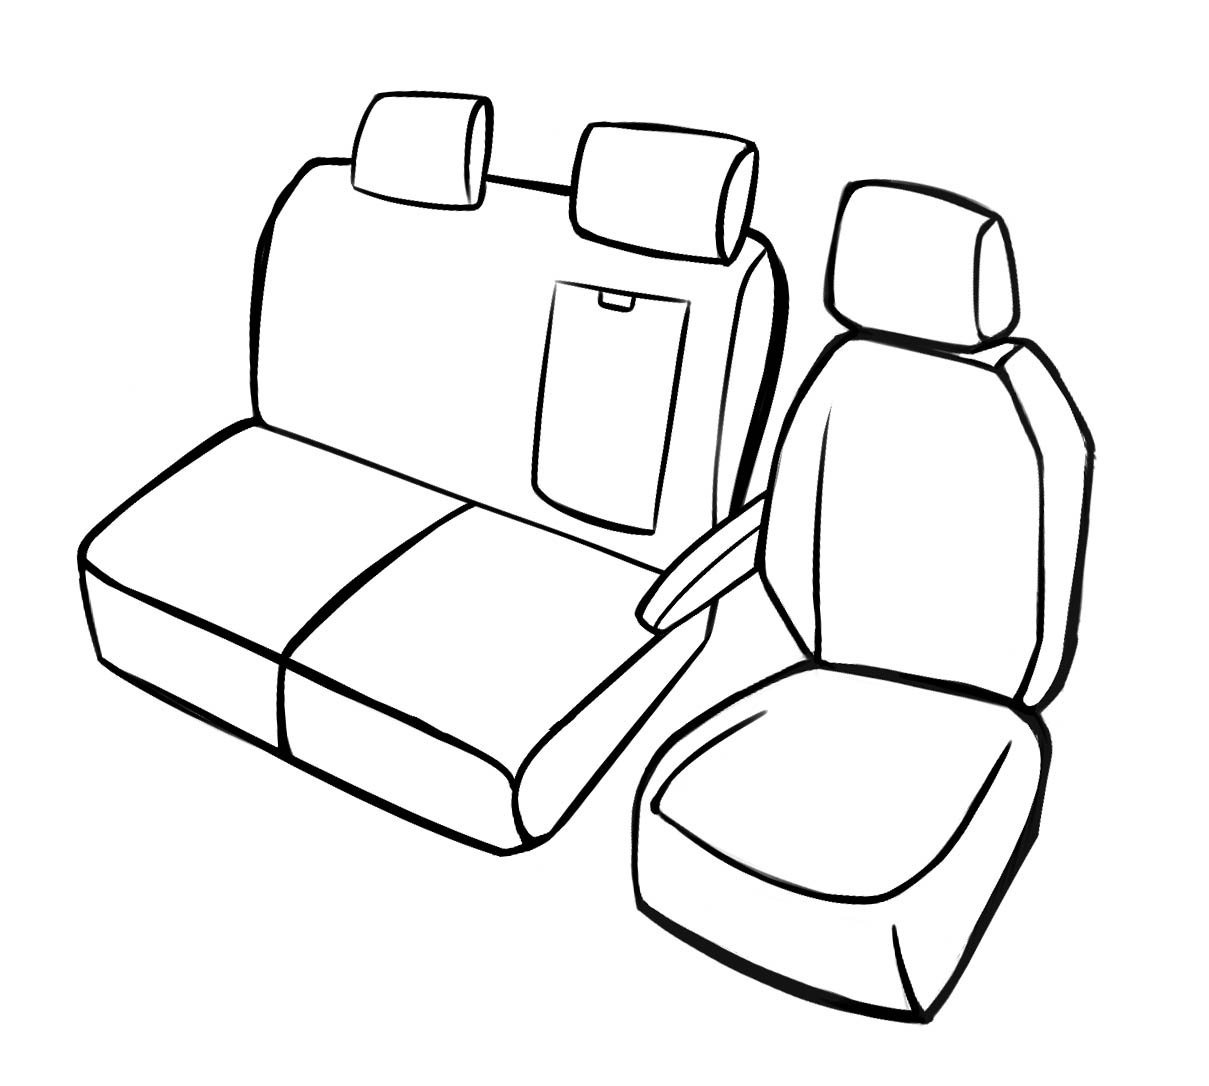 Premium Seat Cover for Ford Transit Custom 2012-Today, 1 single seat cover front, 1 double bench cover